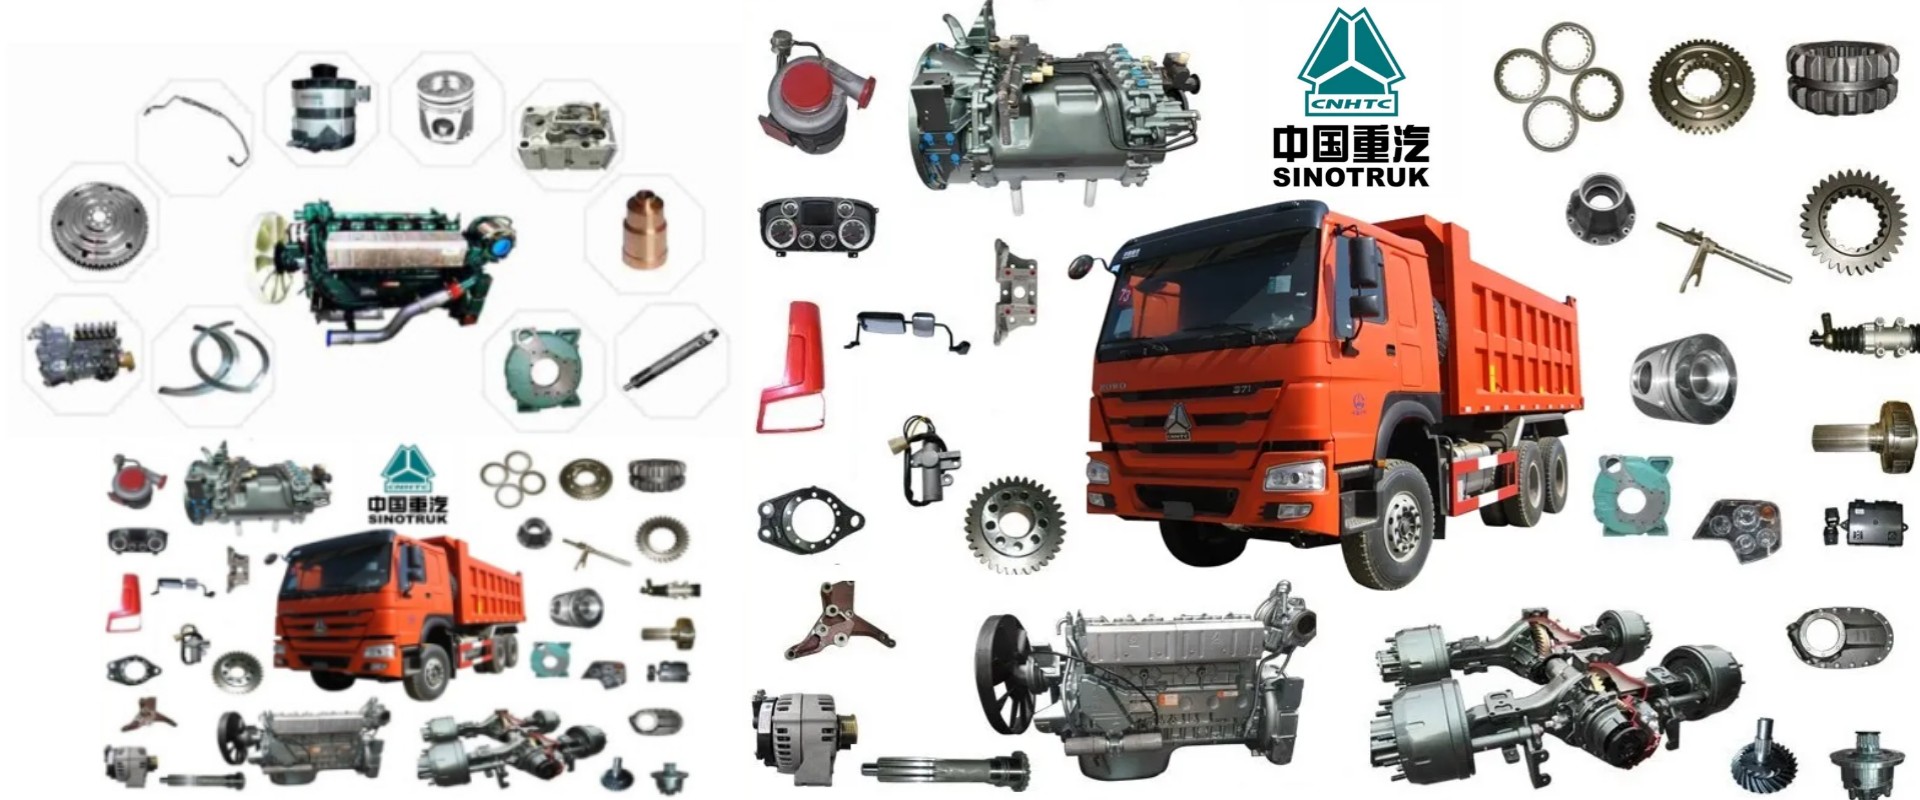 Reliable Supplier of Sinotruk Spare Parts & Howo Truck Parts – Order Now